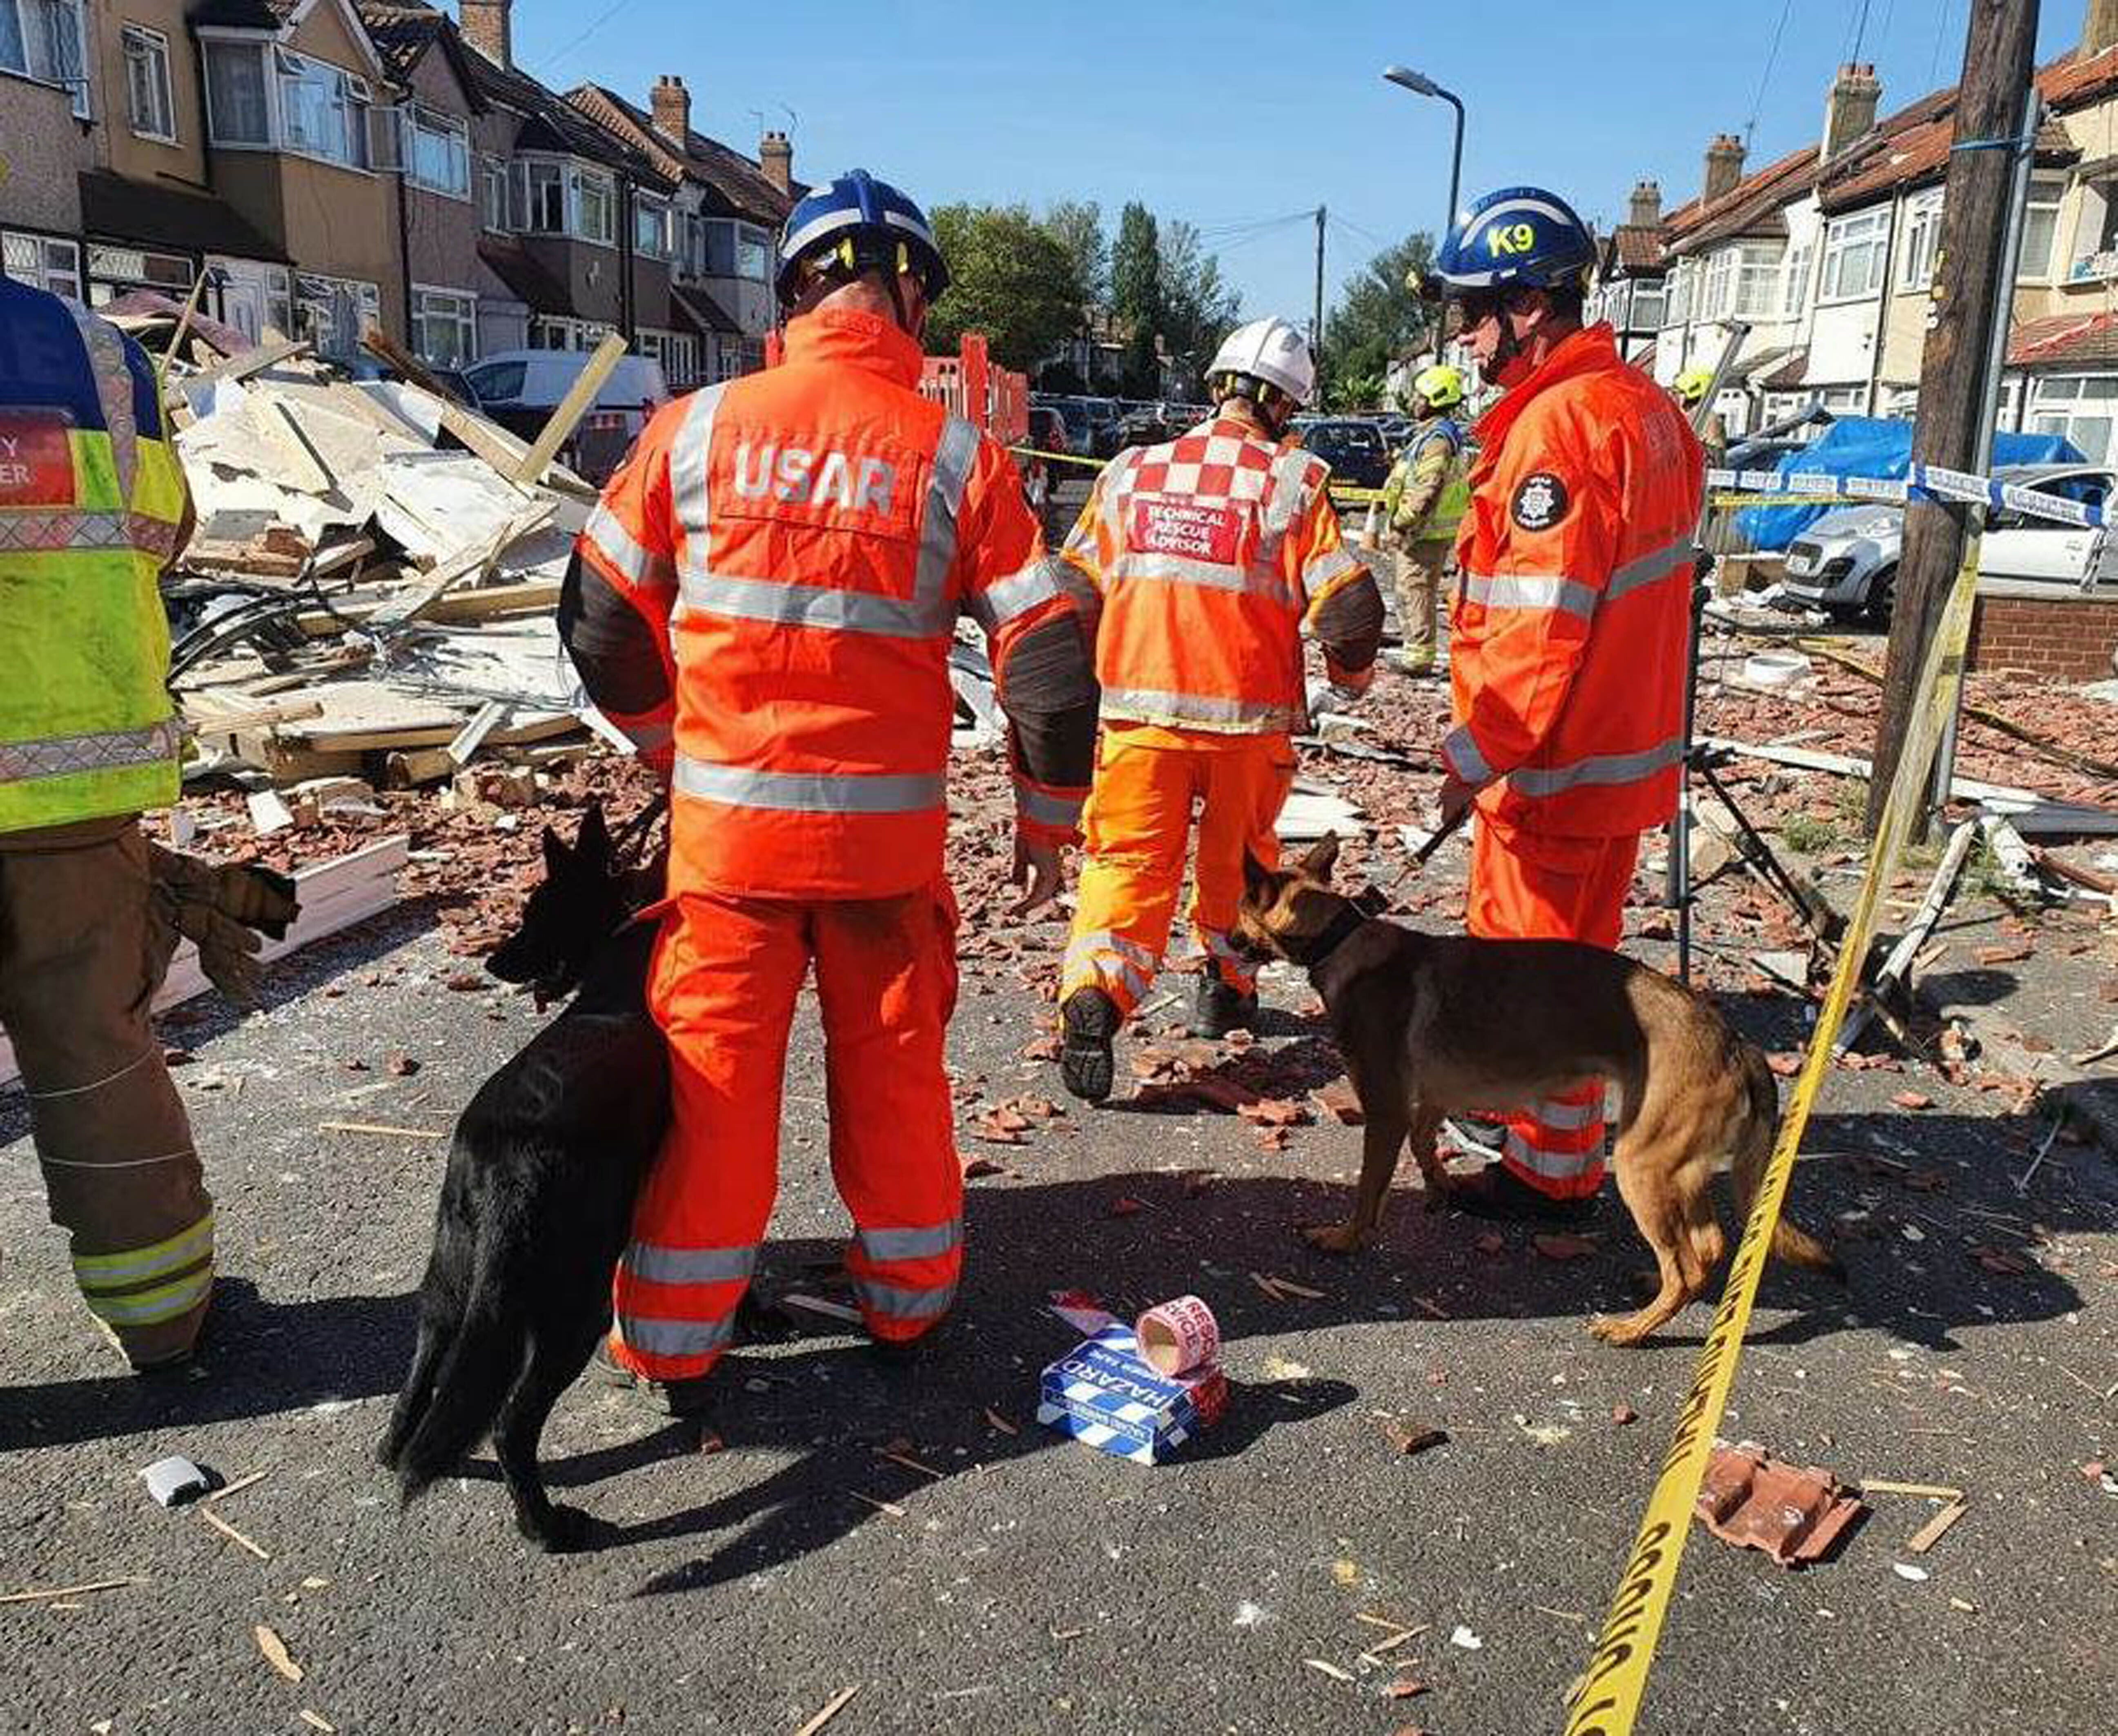 Members of the Urban Search and Rescue team at the scene in Galpin’s Road in Thornton Heath, south London (London Fire Brigade/PA)